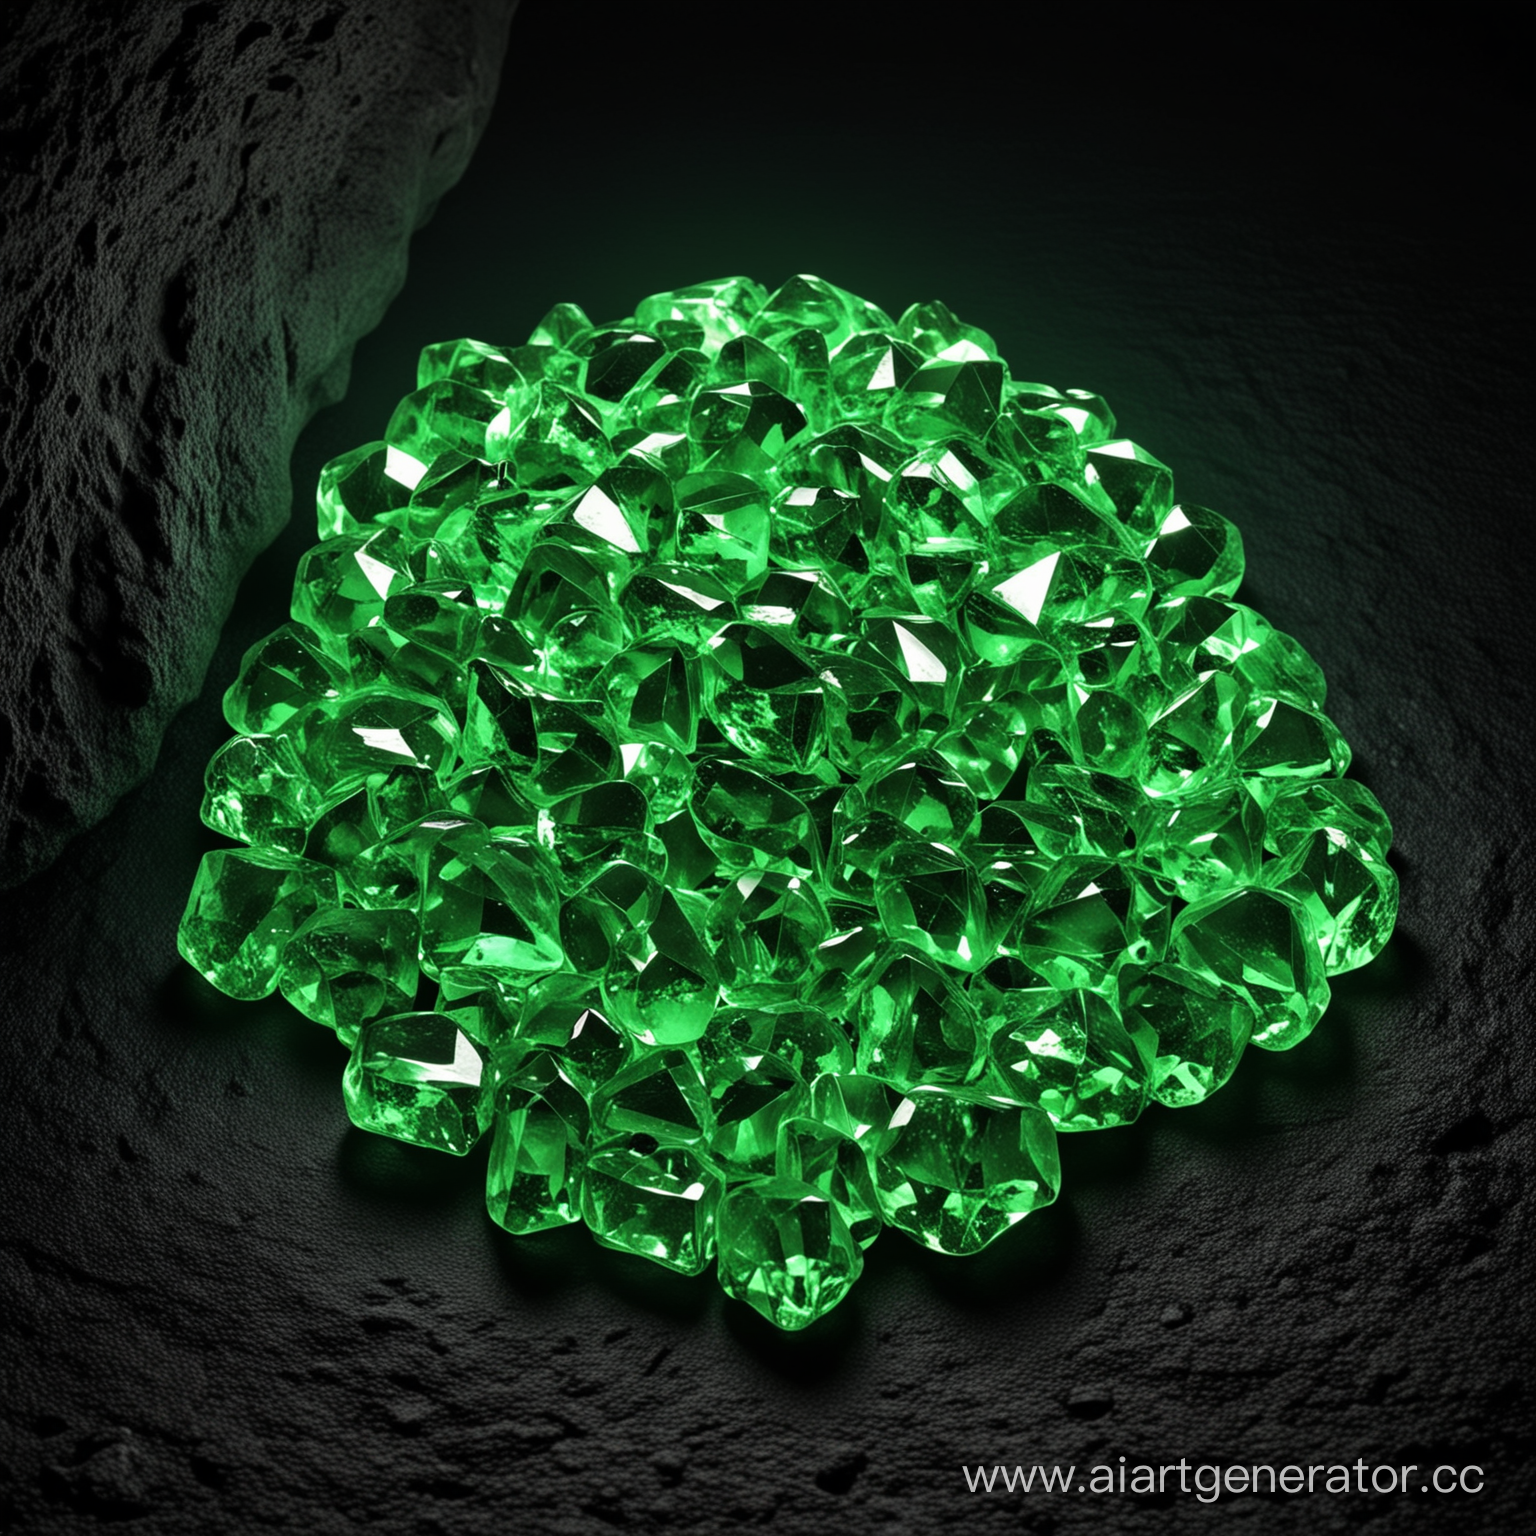 glow green gems from cave on black background